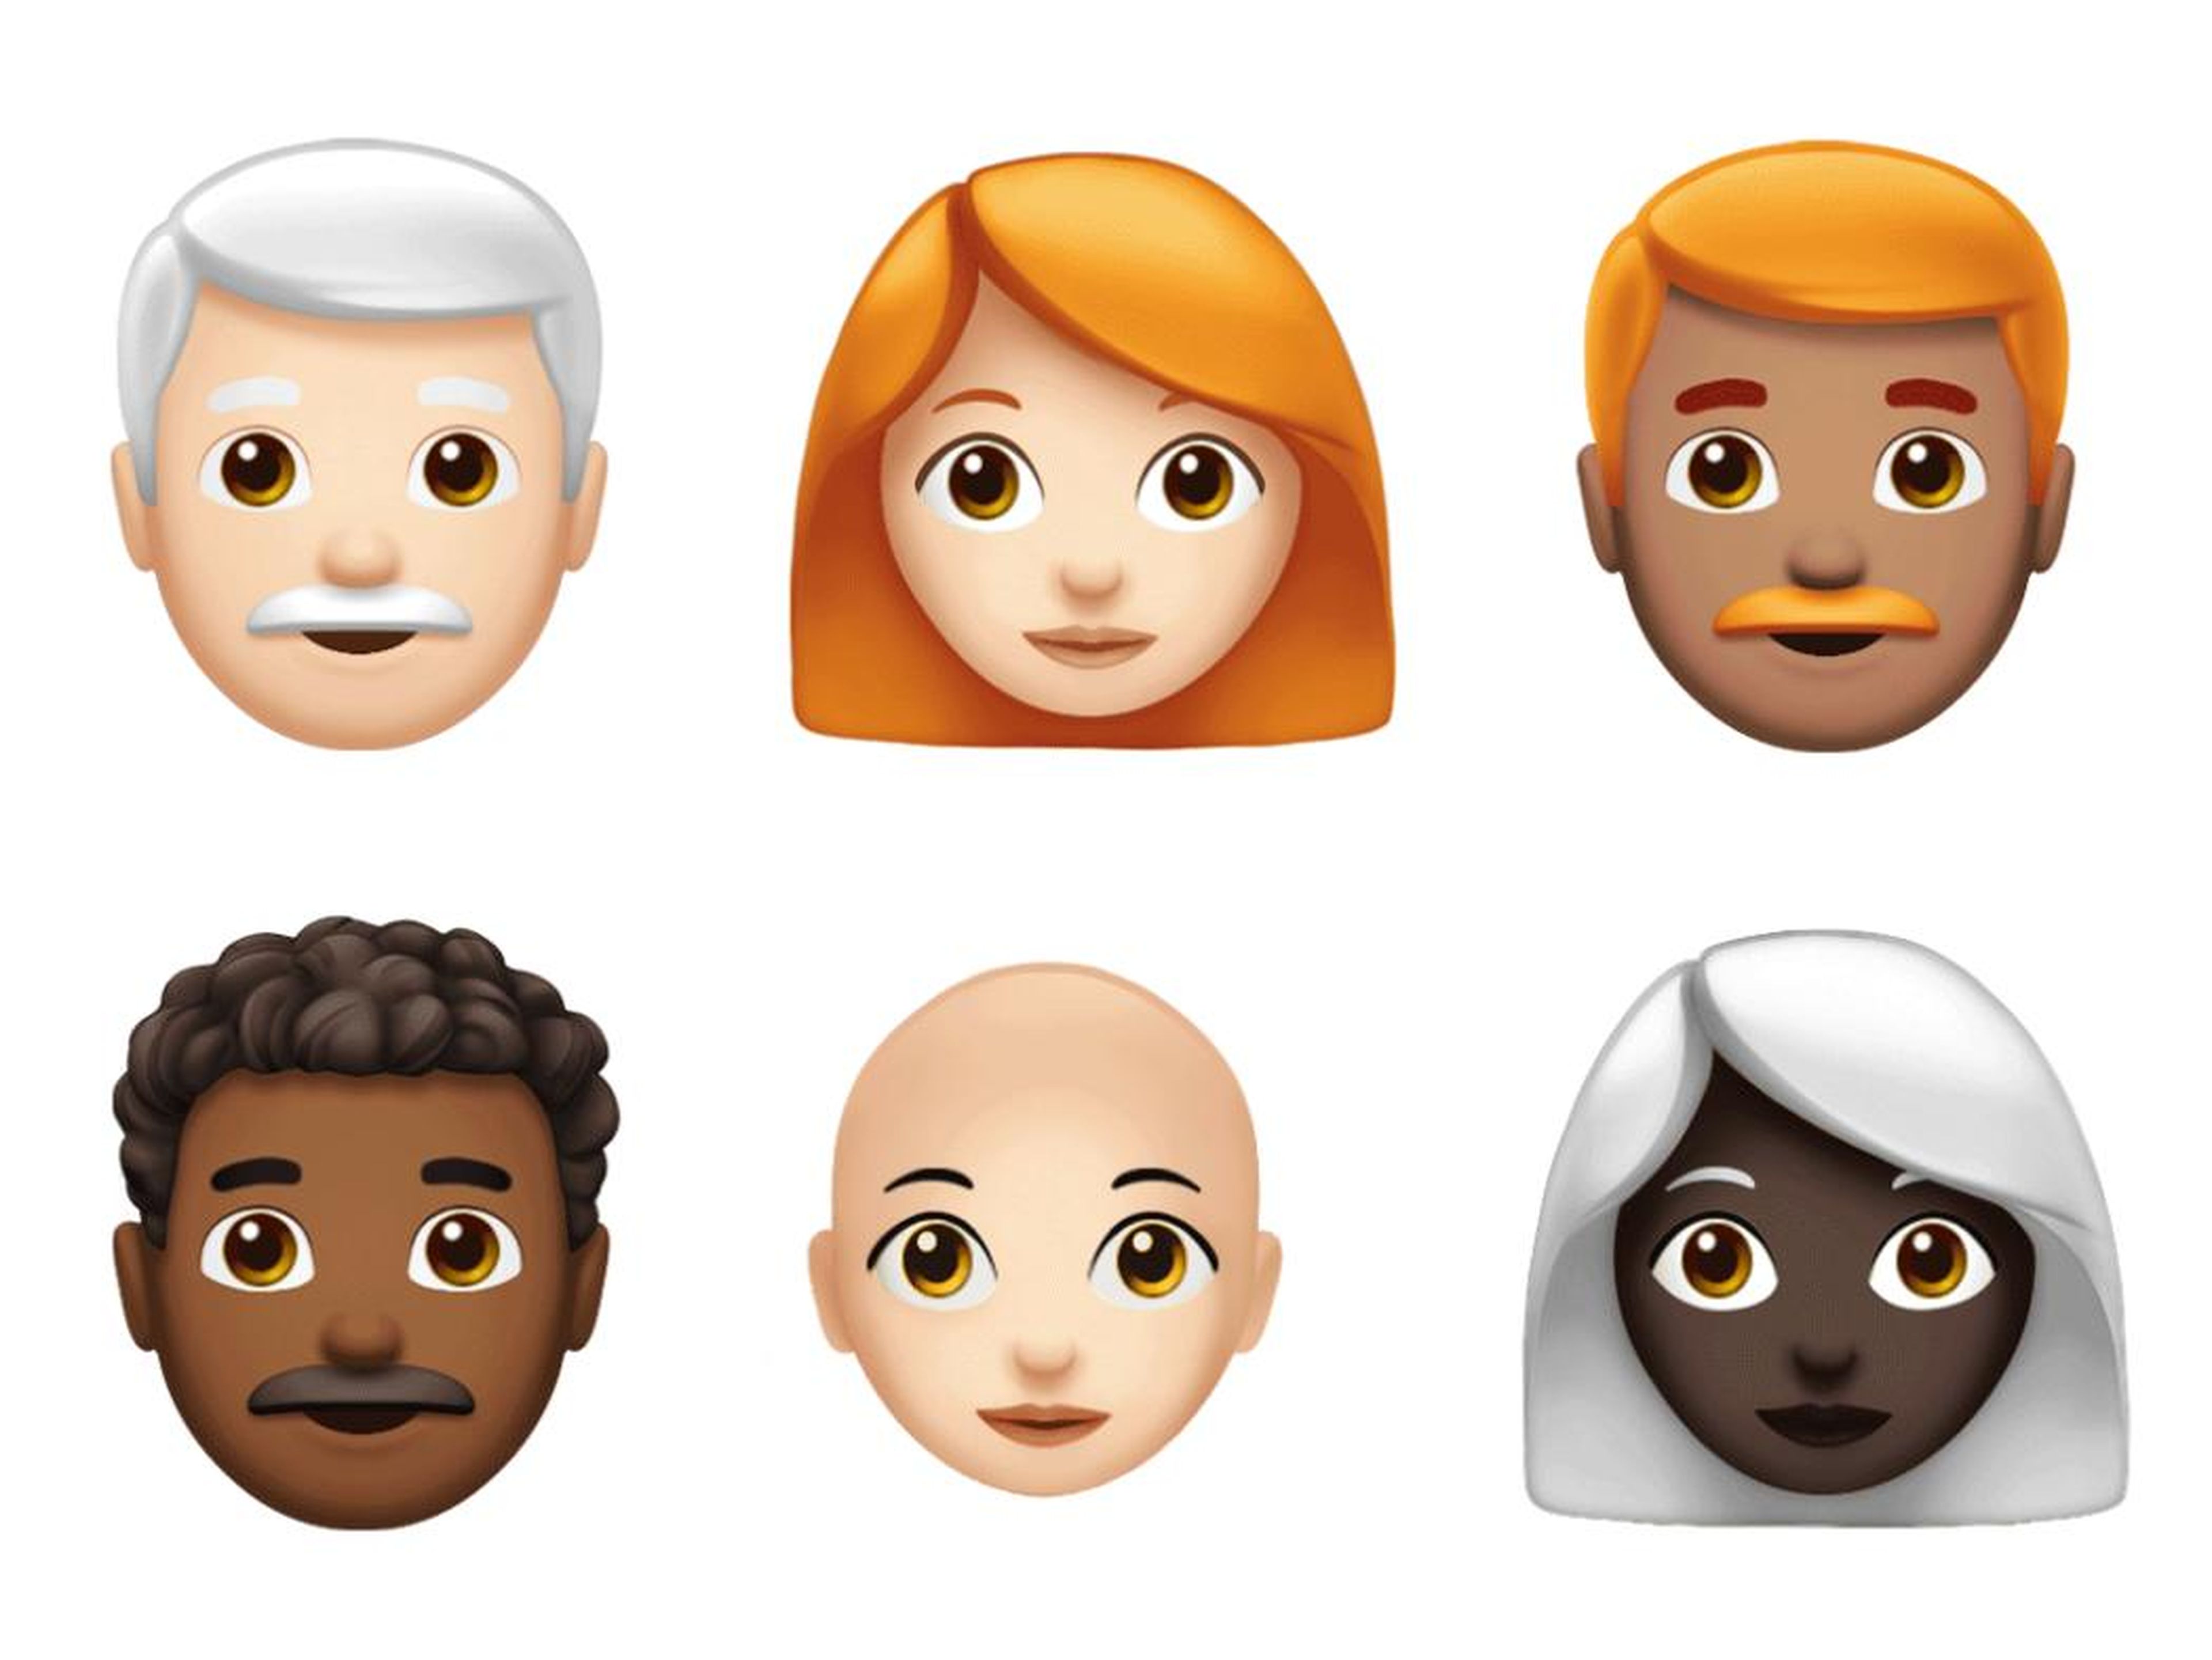 Here's our first look at some of the new emoji coming to iPhones later this year